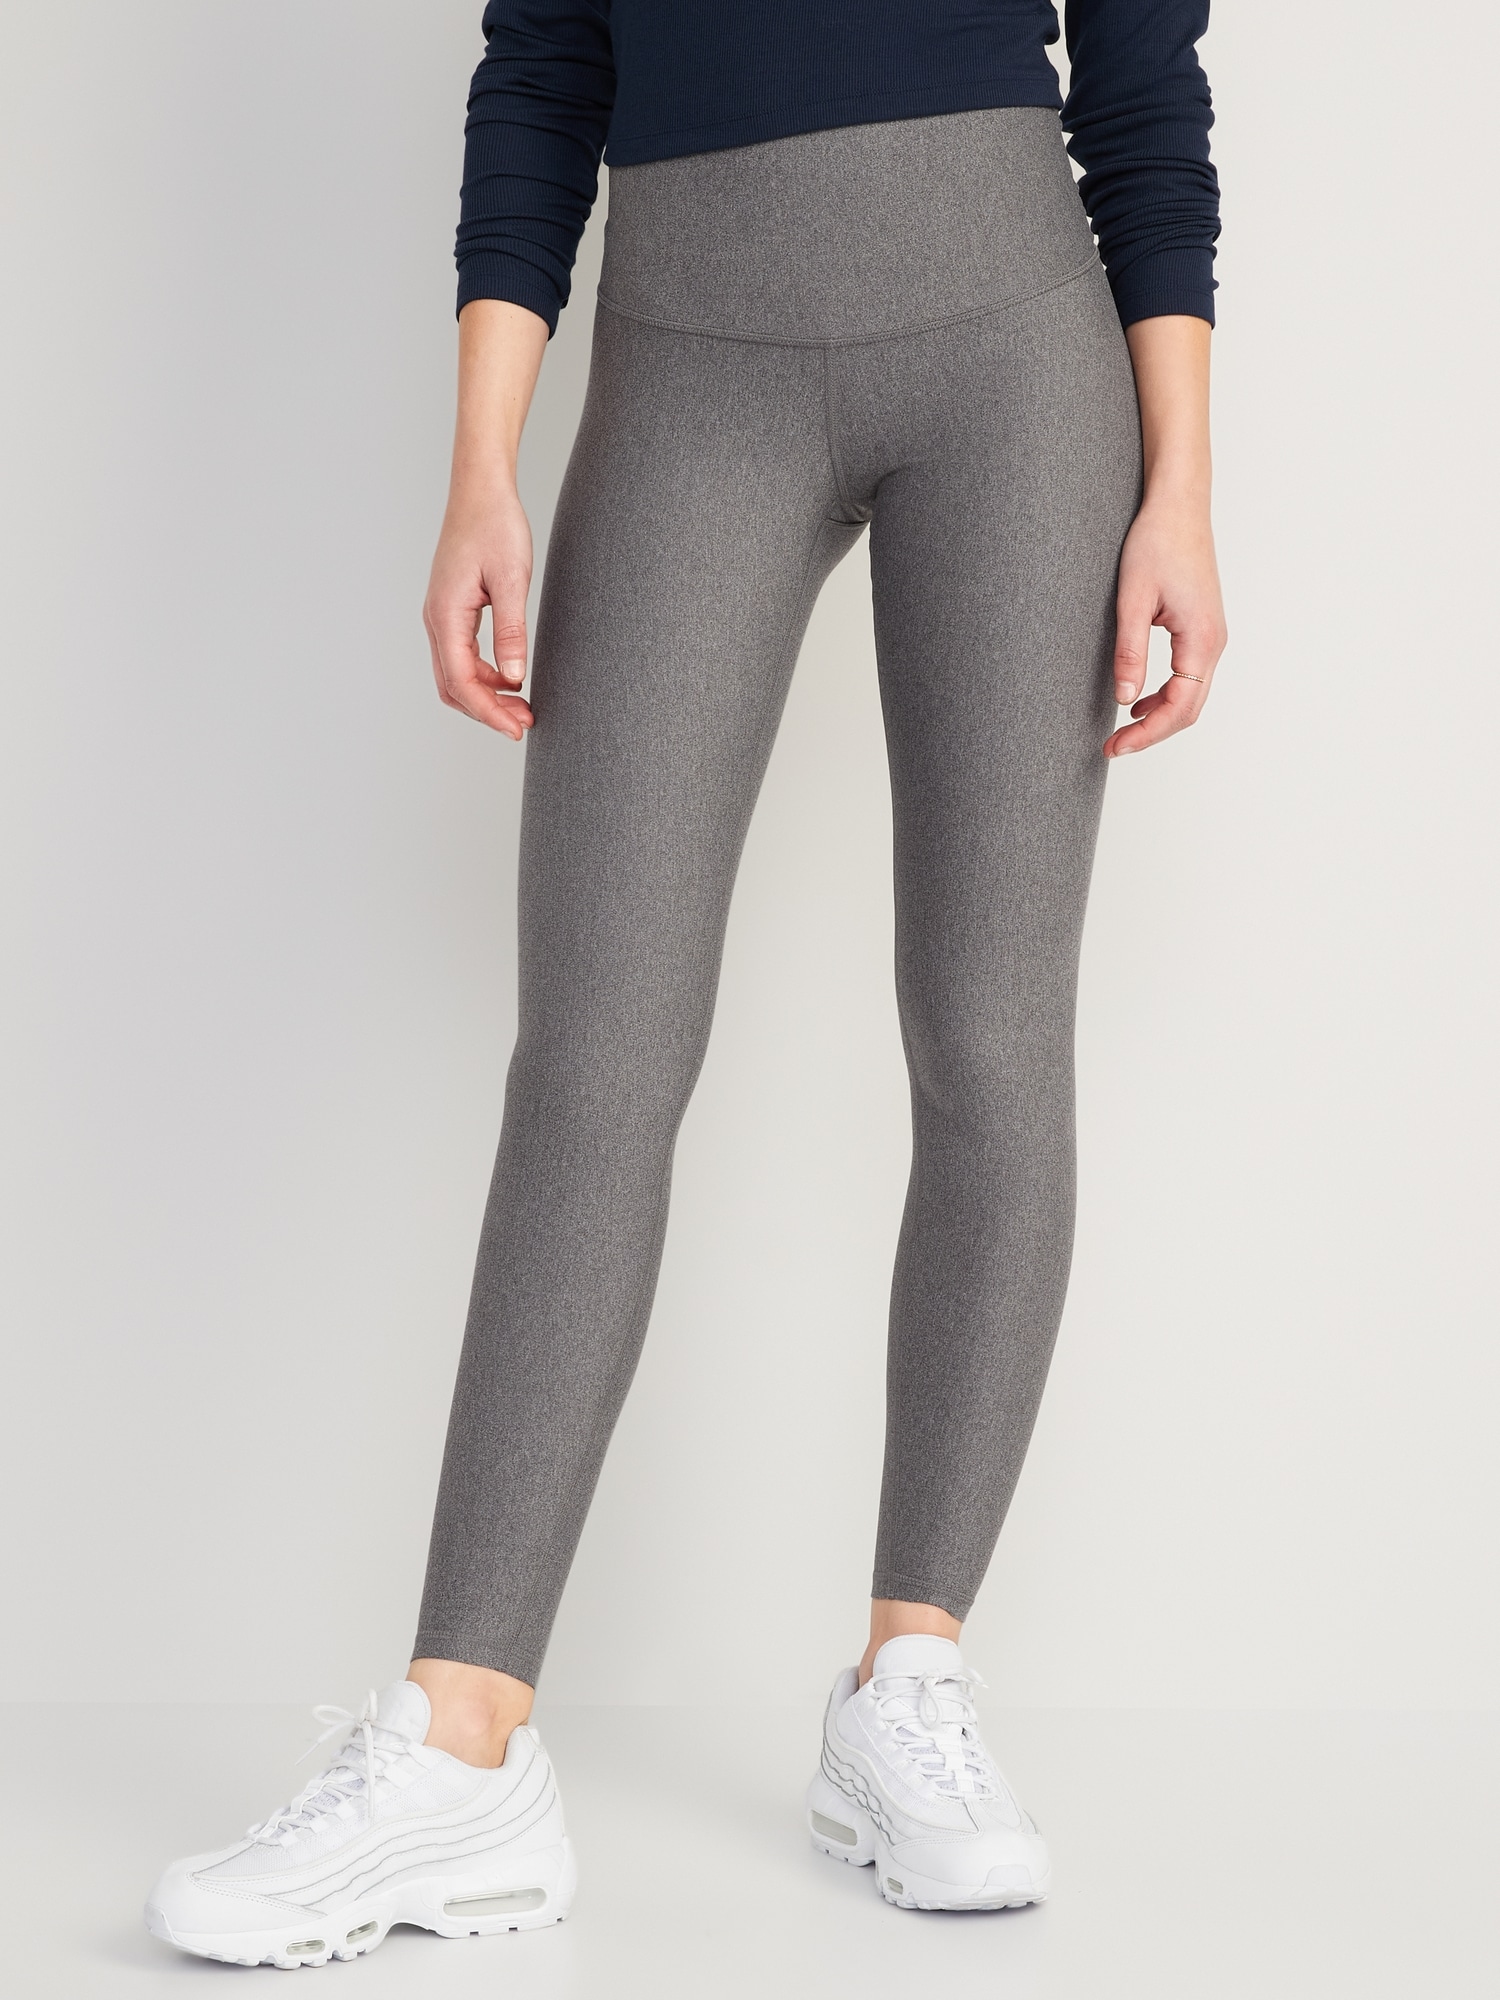 Navy Core Pocket Leggings – Just Strong